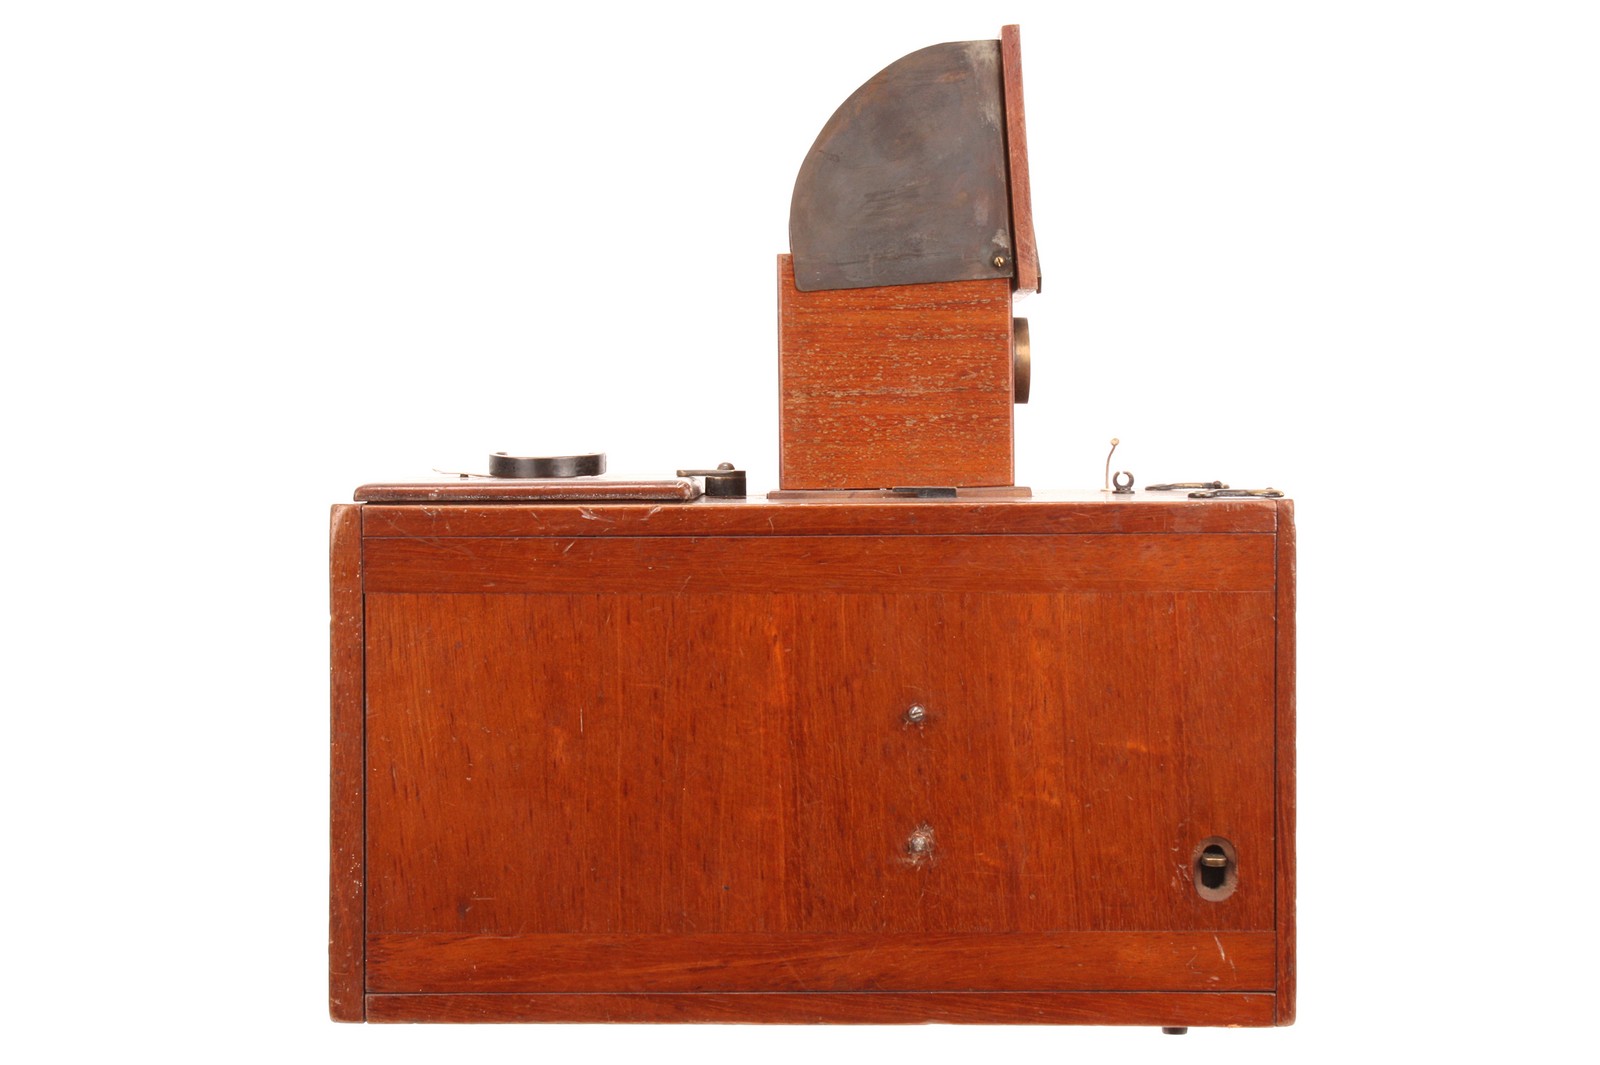 A Dr. R. Krügener Normal Simplex 9x12cm Mahogany Detective Camera, with pop-up periscopic waist - Image 3 of 5